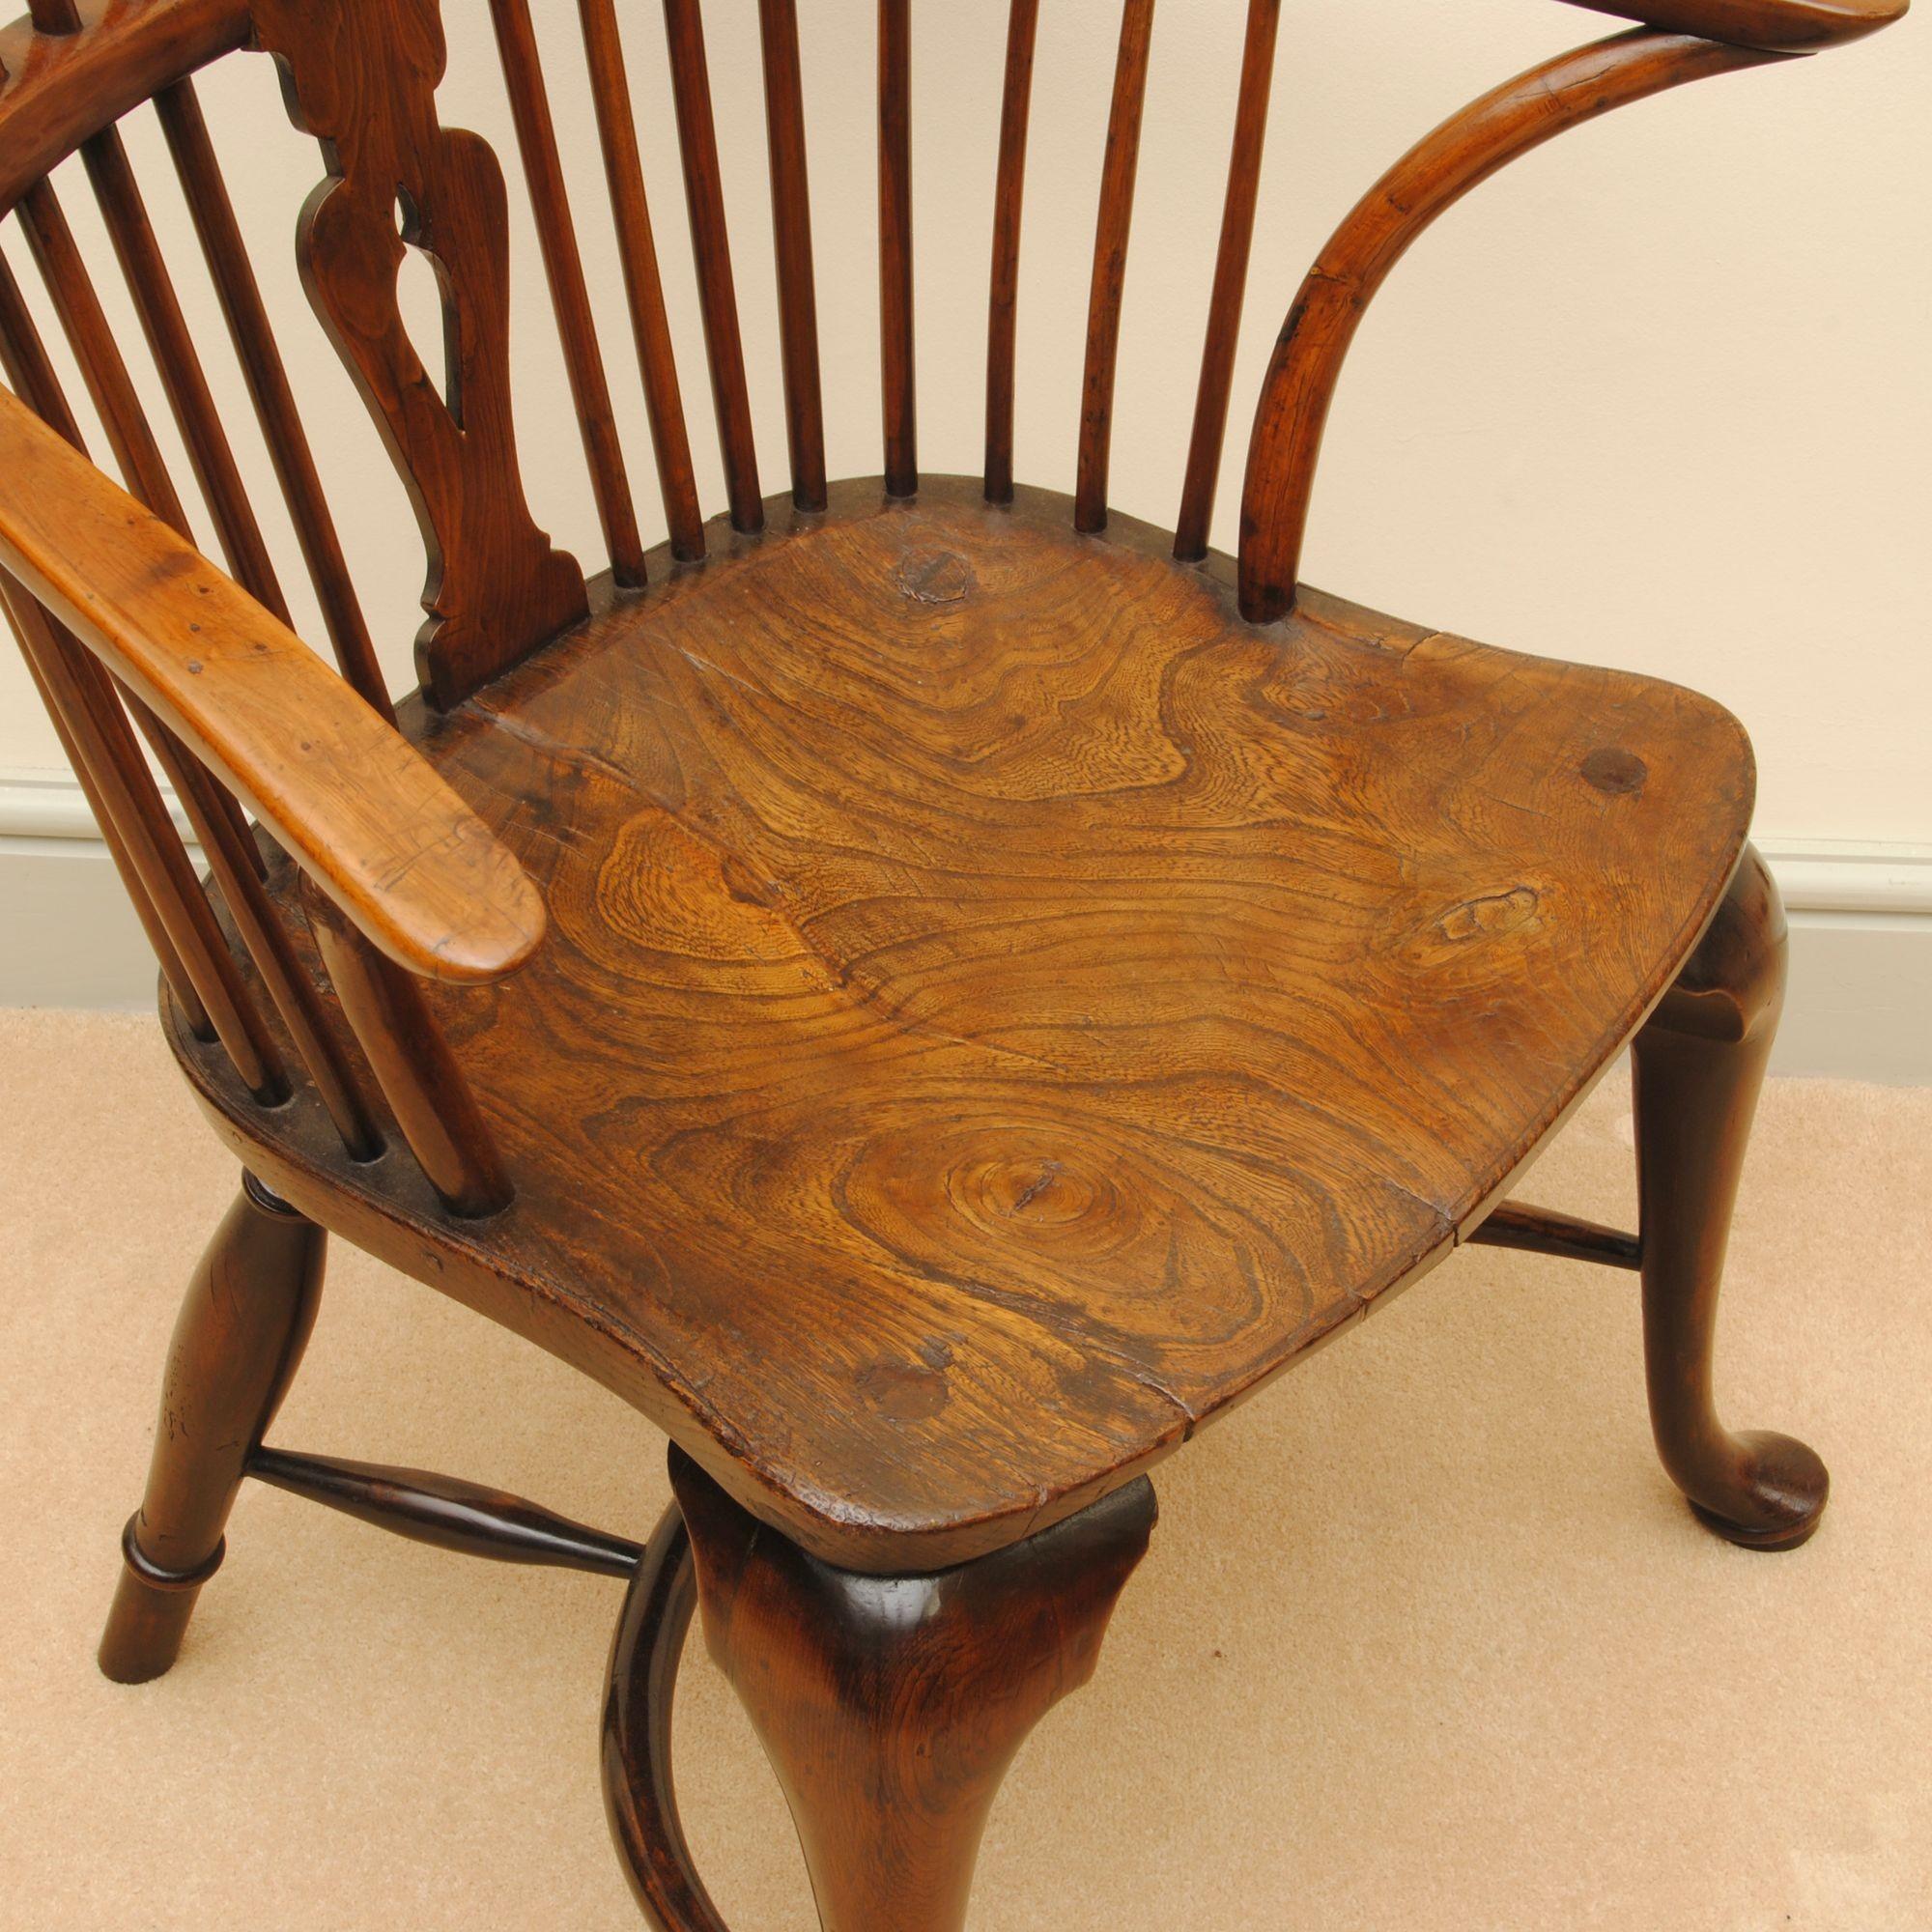 18th Century Thames Valley Yew Wood Windsor Armchair In Good Condition For Sale In Lincolnshire, GB